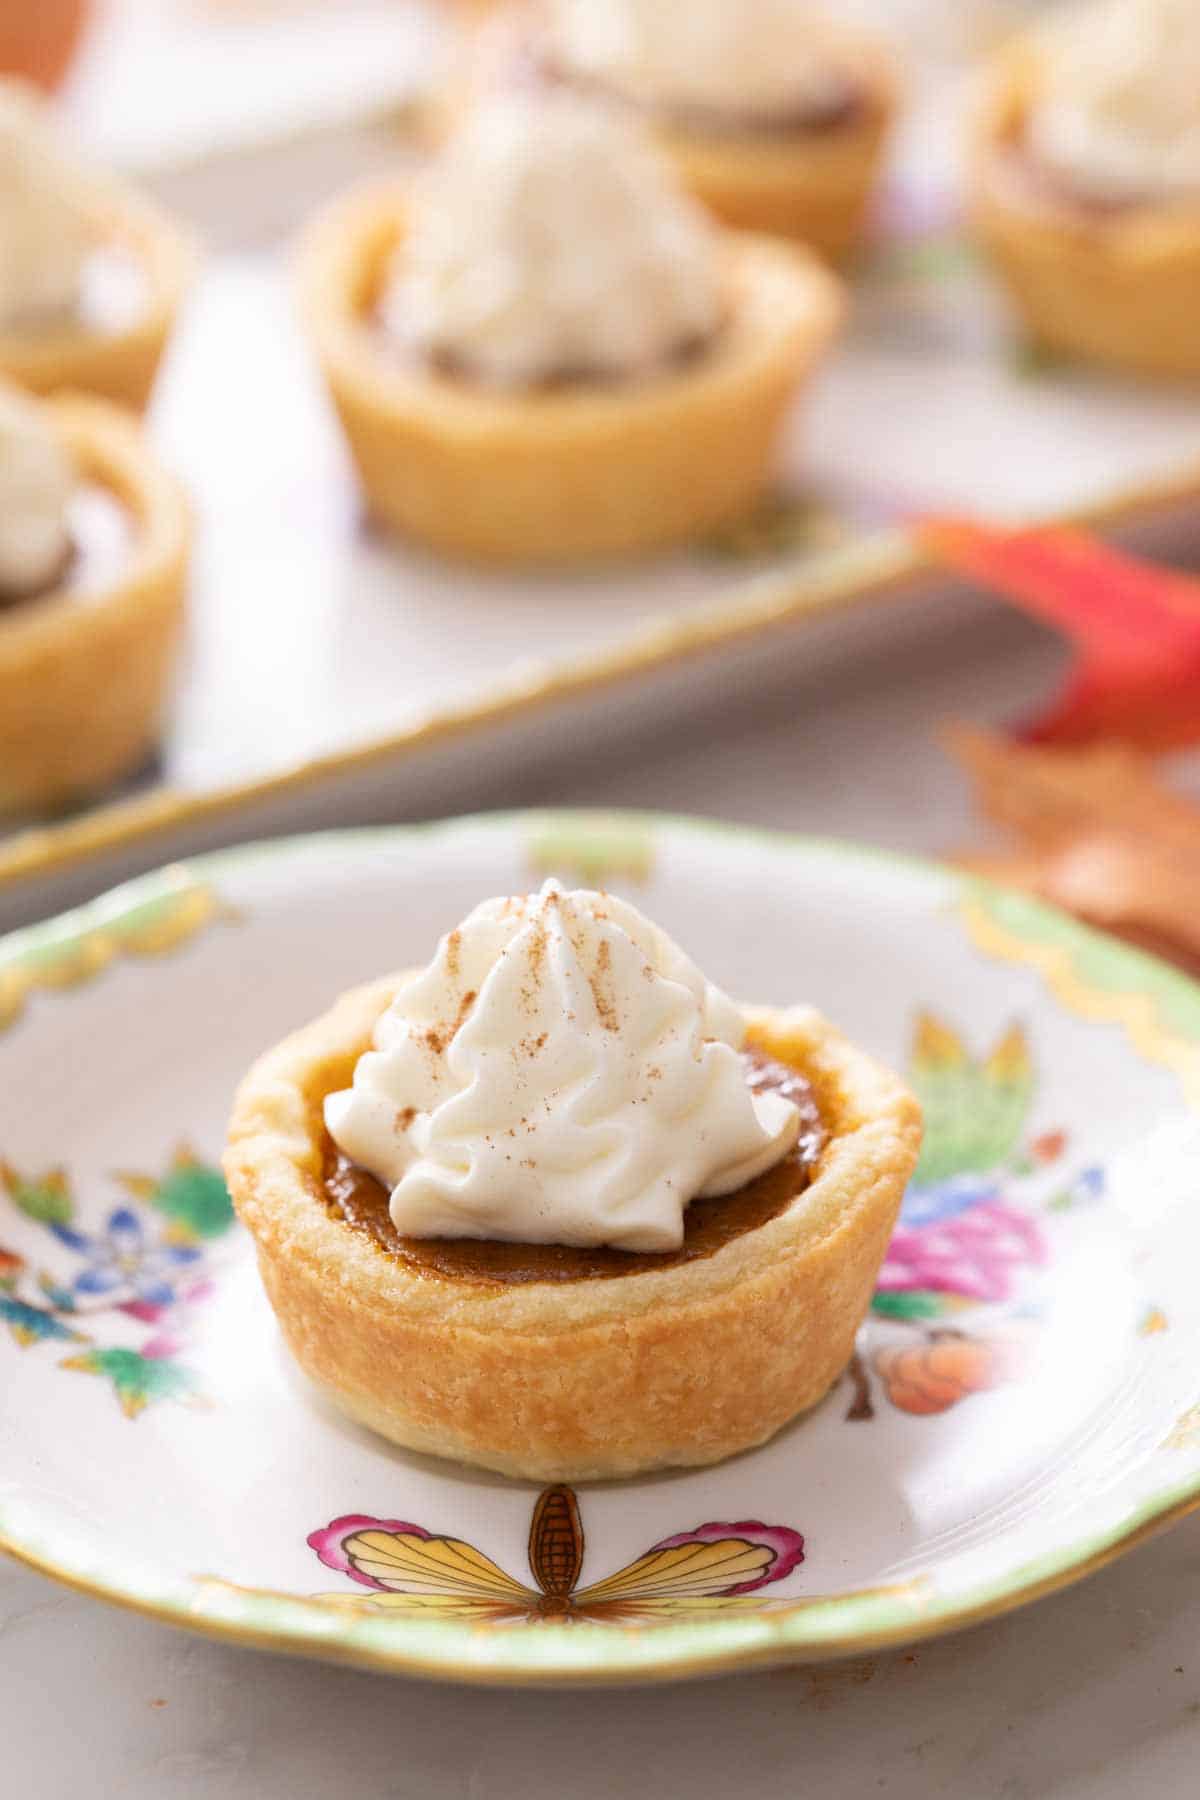 A plate with a mini pumpkin pie topped with whipped cream. More pies out of focus in the background.